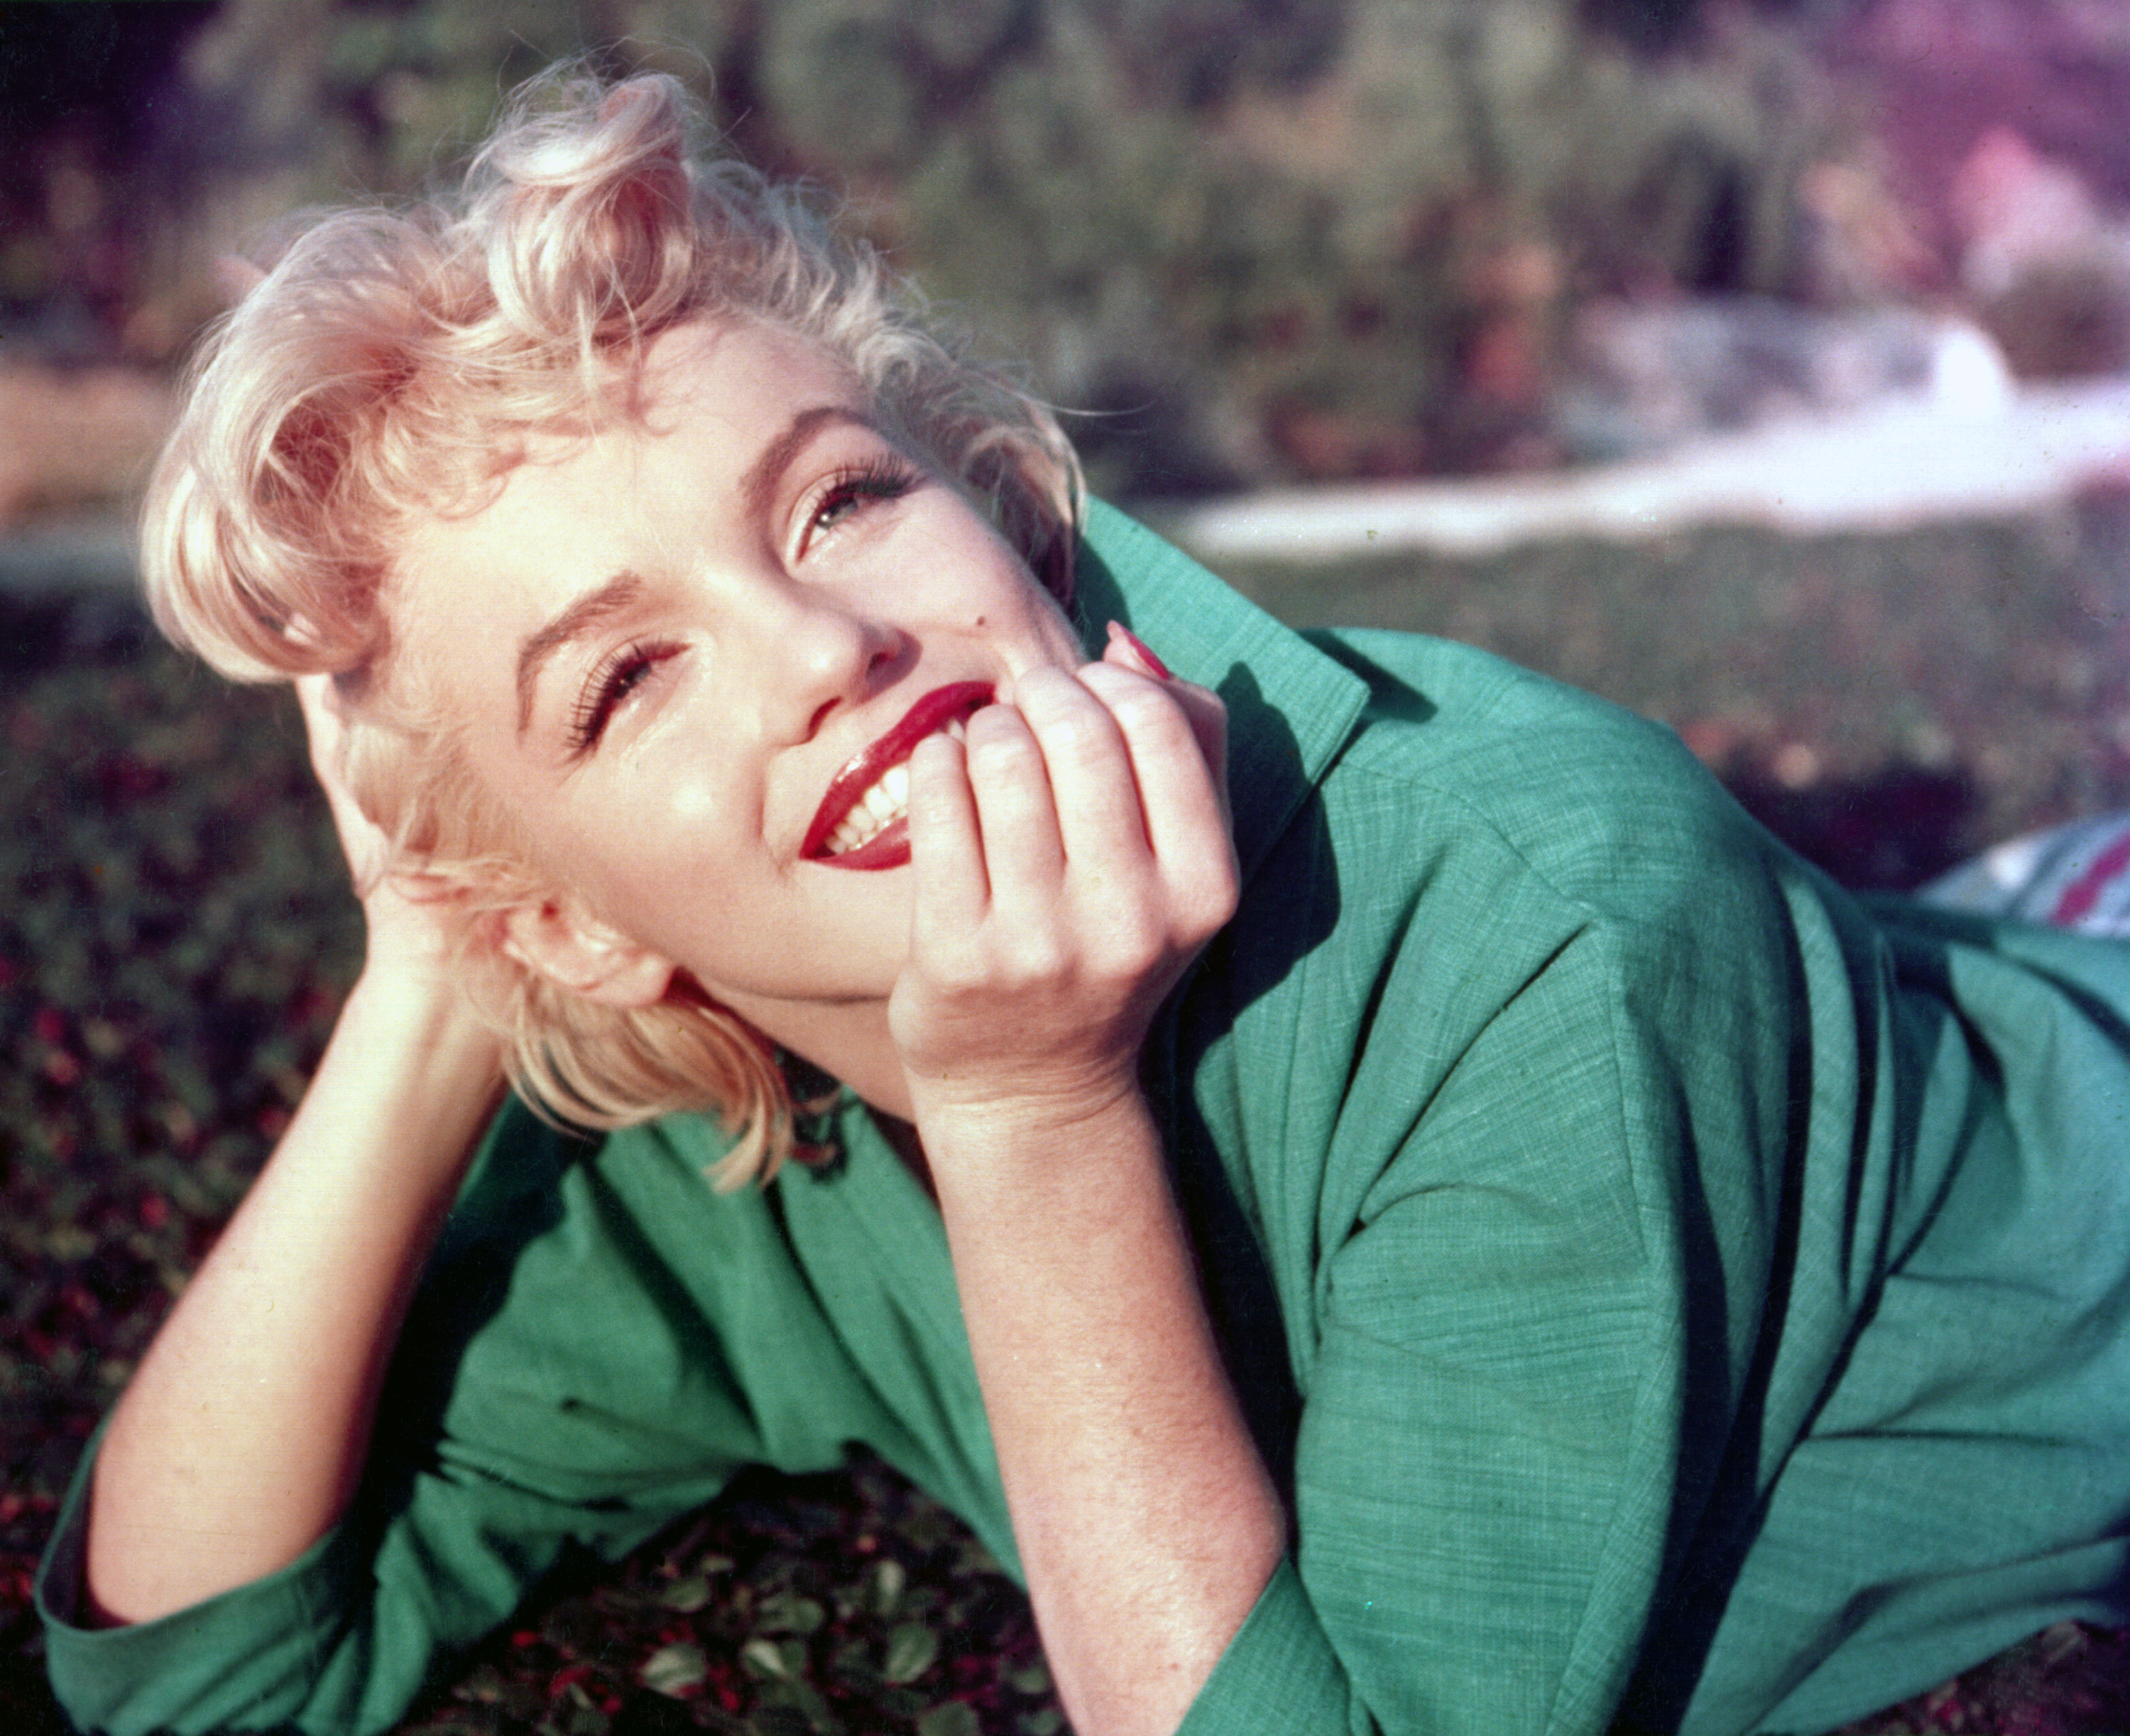 Marilyn Monroe poses for a portrait in 1954 in Palm Springs, California | Source: Getty Images